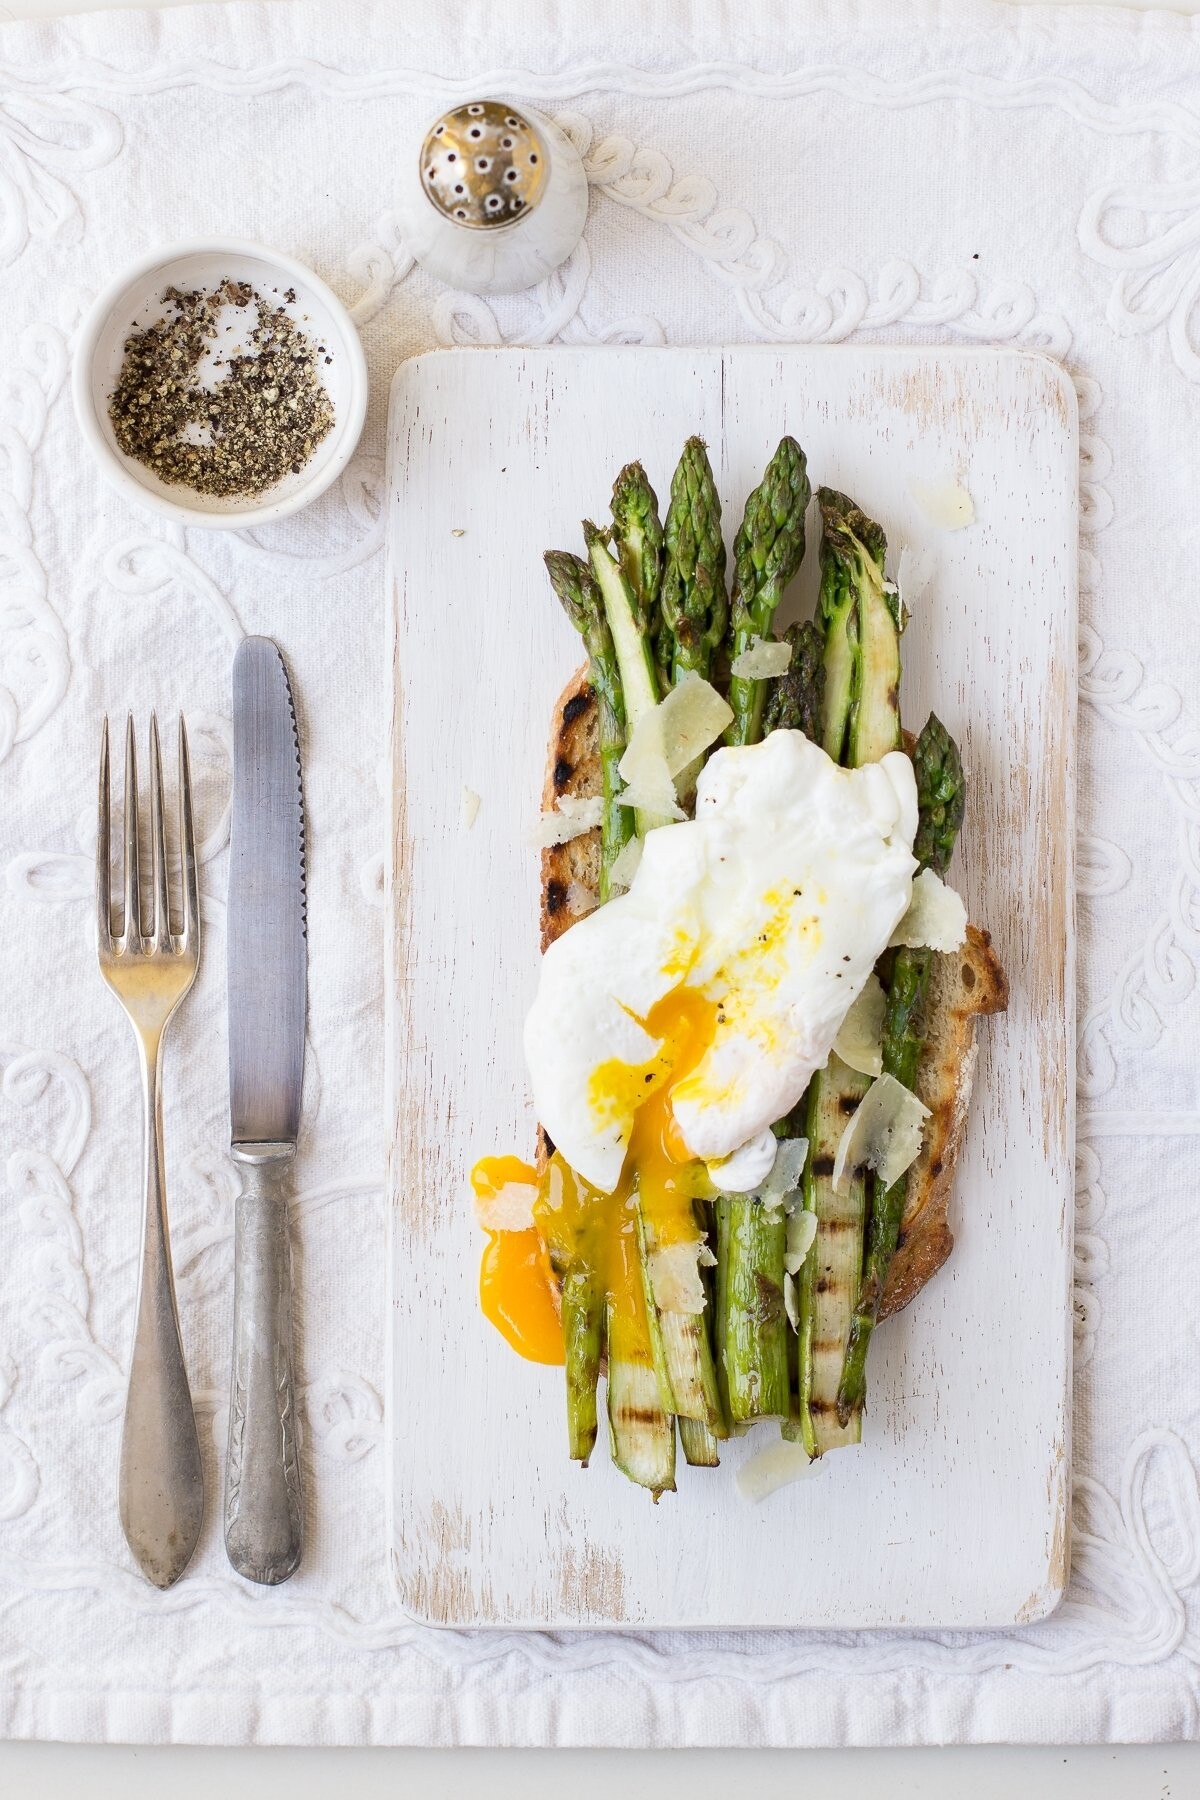 This a photo of poached egg put on grilled asparagus with parmesan and toasted bread. Wonderful spring breakfast. I really love that runny yolk and bright white stylisation.